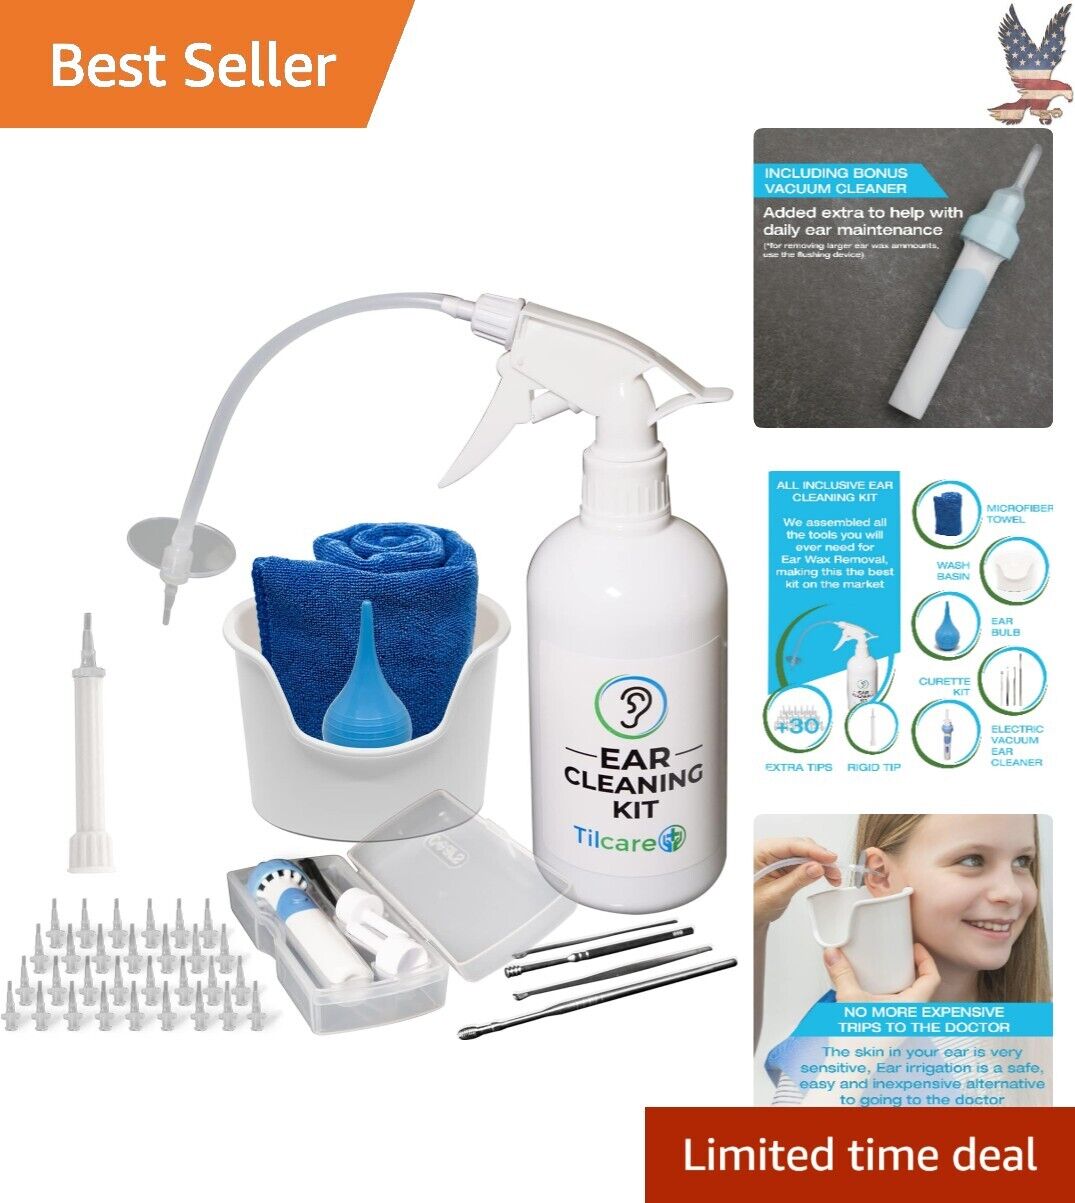 Complete Gentle Vacuum Ear Wax Removal Kit - Includes 30 Tips & Accessories